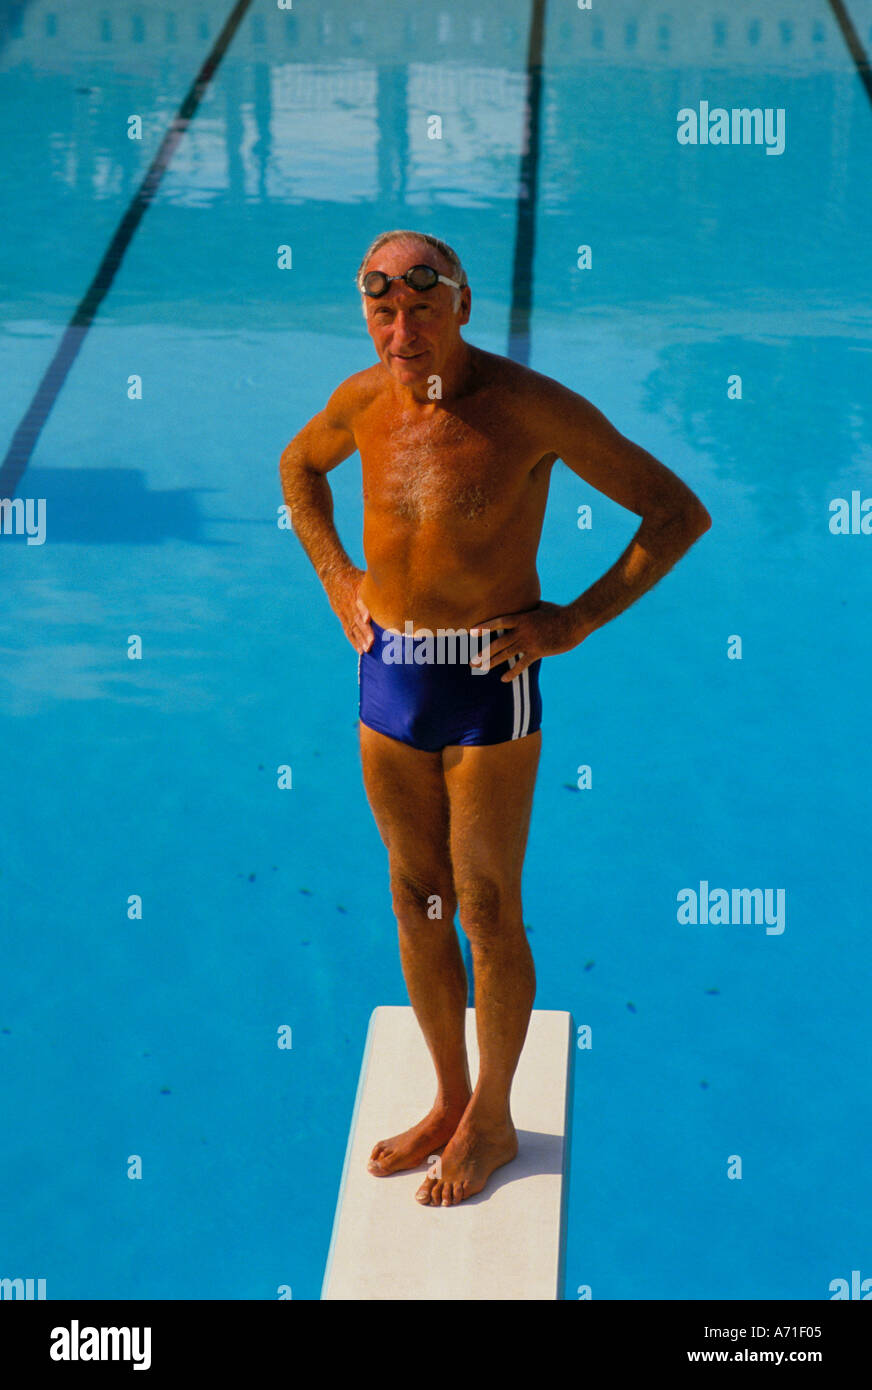 https://c8.alamy.com/comp/A71F05/tanned-and-fit-senior-man-wearing-blue-swim-trunks-and-a-pair-of-goggles-A71F05.jpg